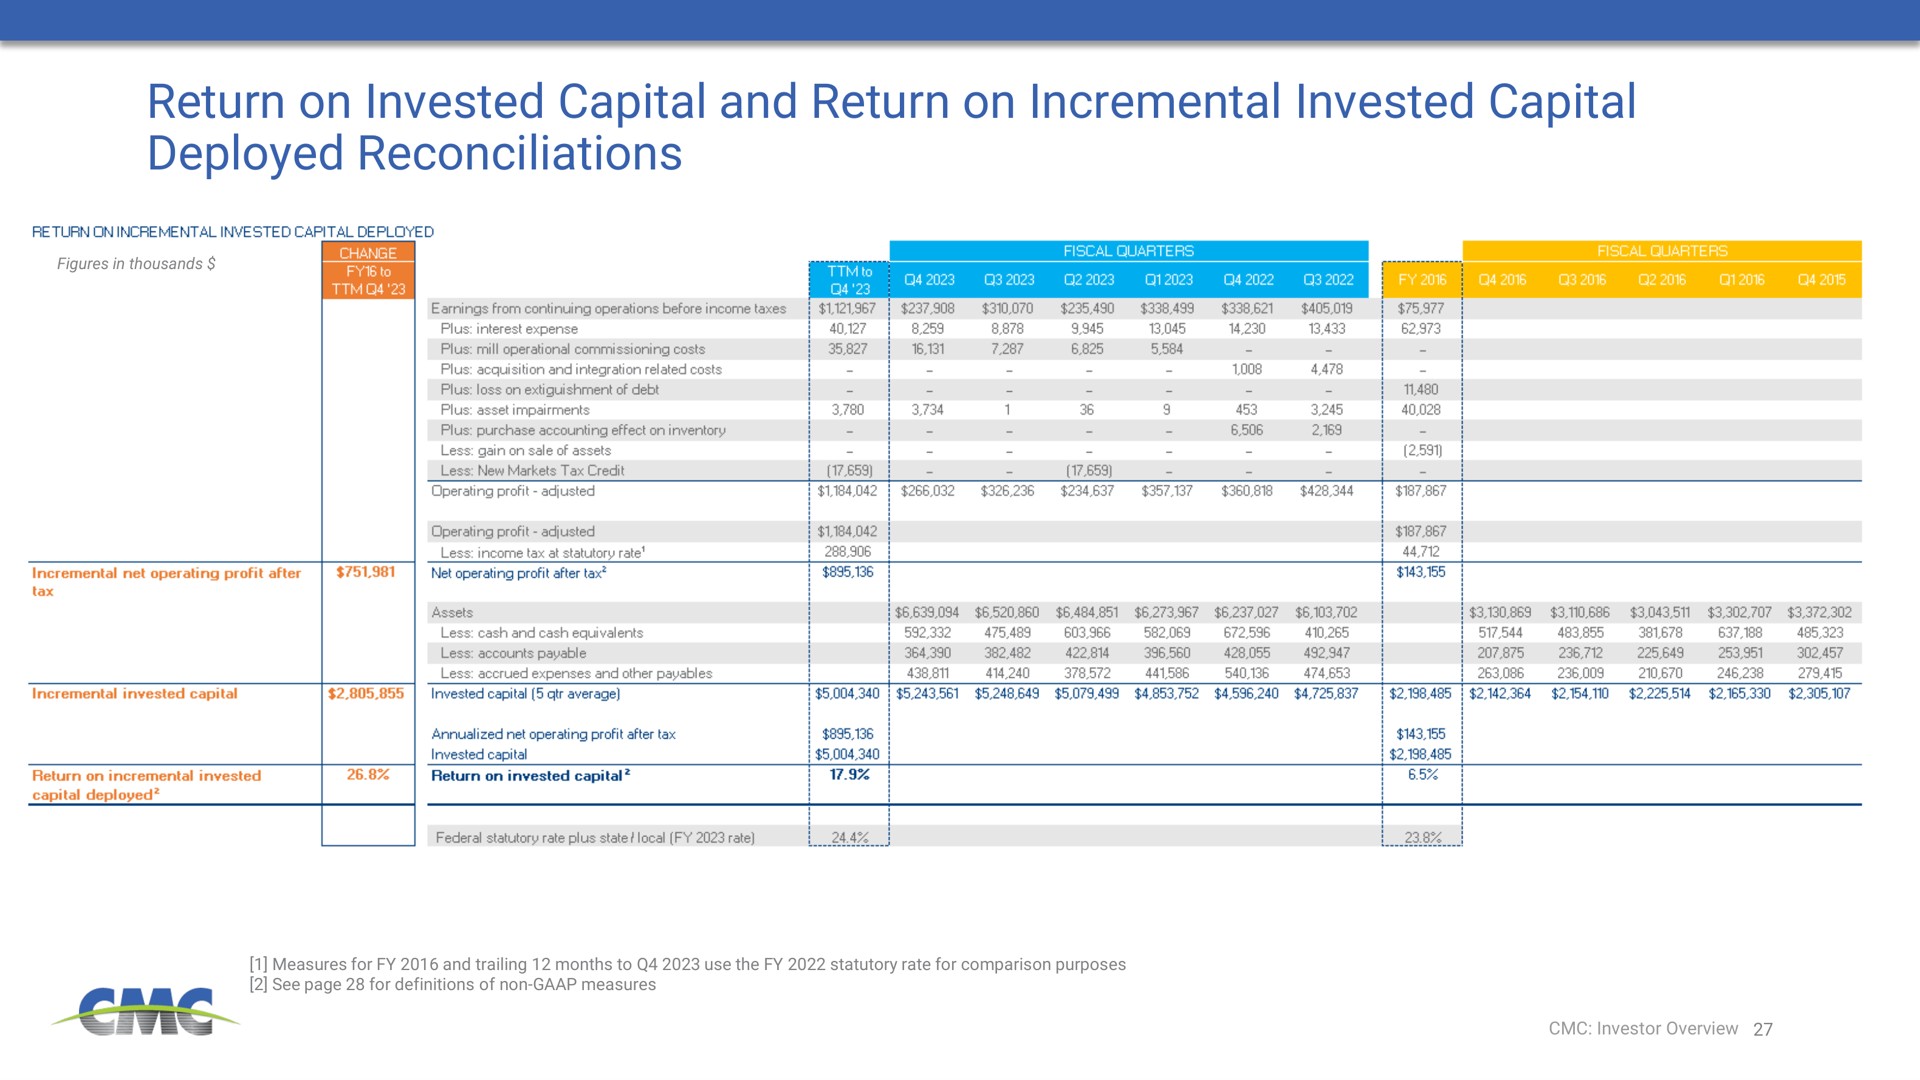 return on invested capital and return on incremental invested capital deployed reconciliations | Commercial Metals Company